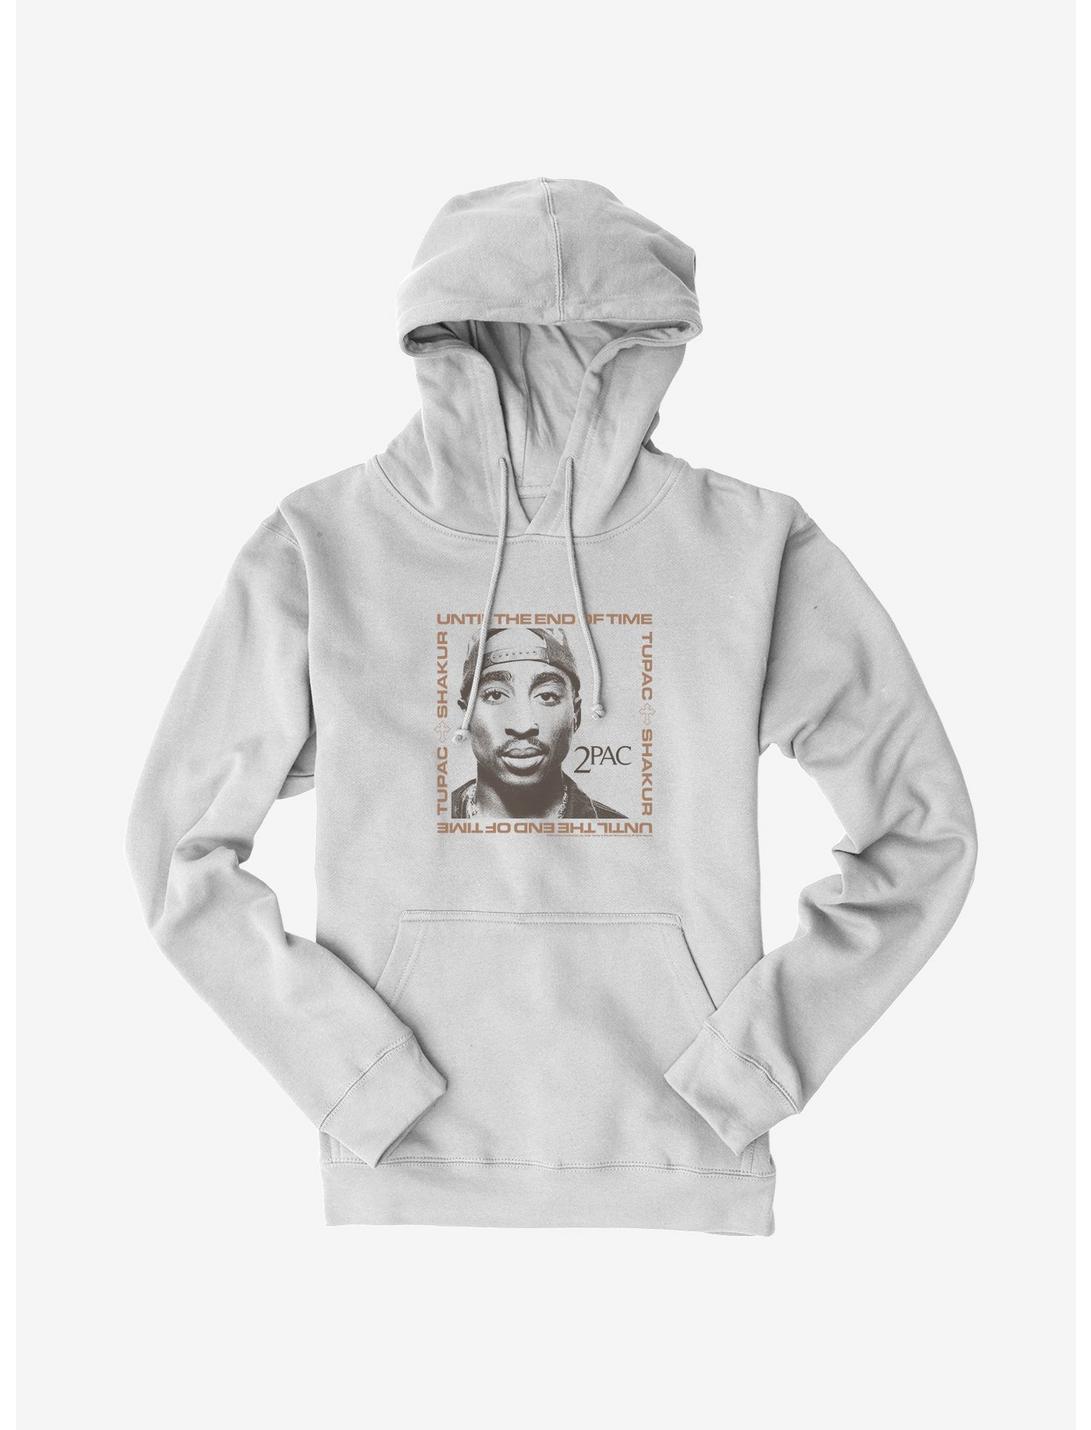 2PAC Until The End Of Time Hoodie, WHITE, hi-res